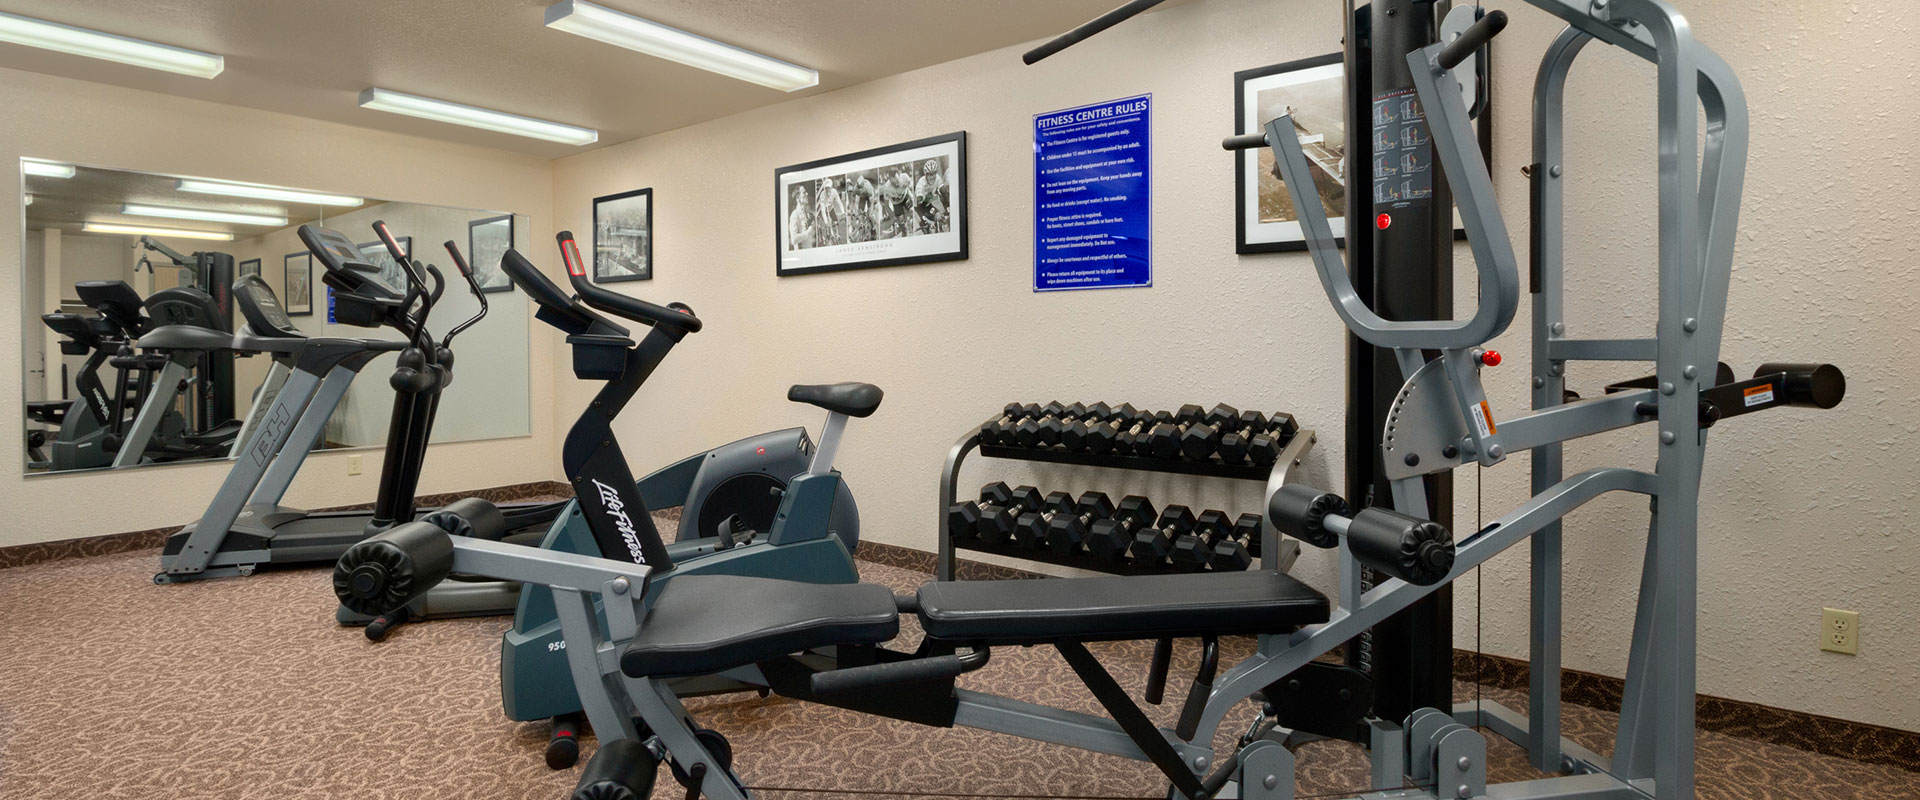 The fitness centre at Days Inn Red Deer, Alberta features several pieces of modern exercise equipment, weights and a large mirror in the area.
